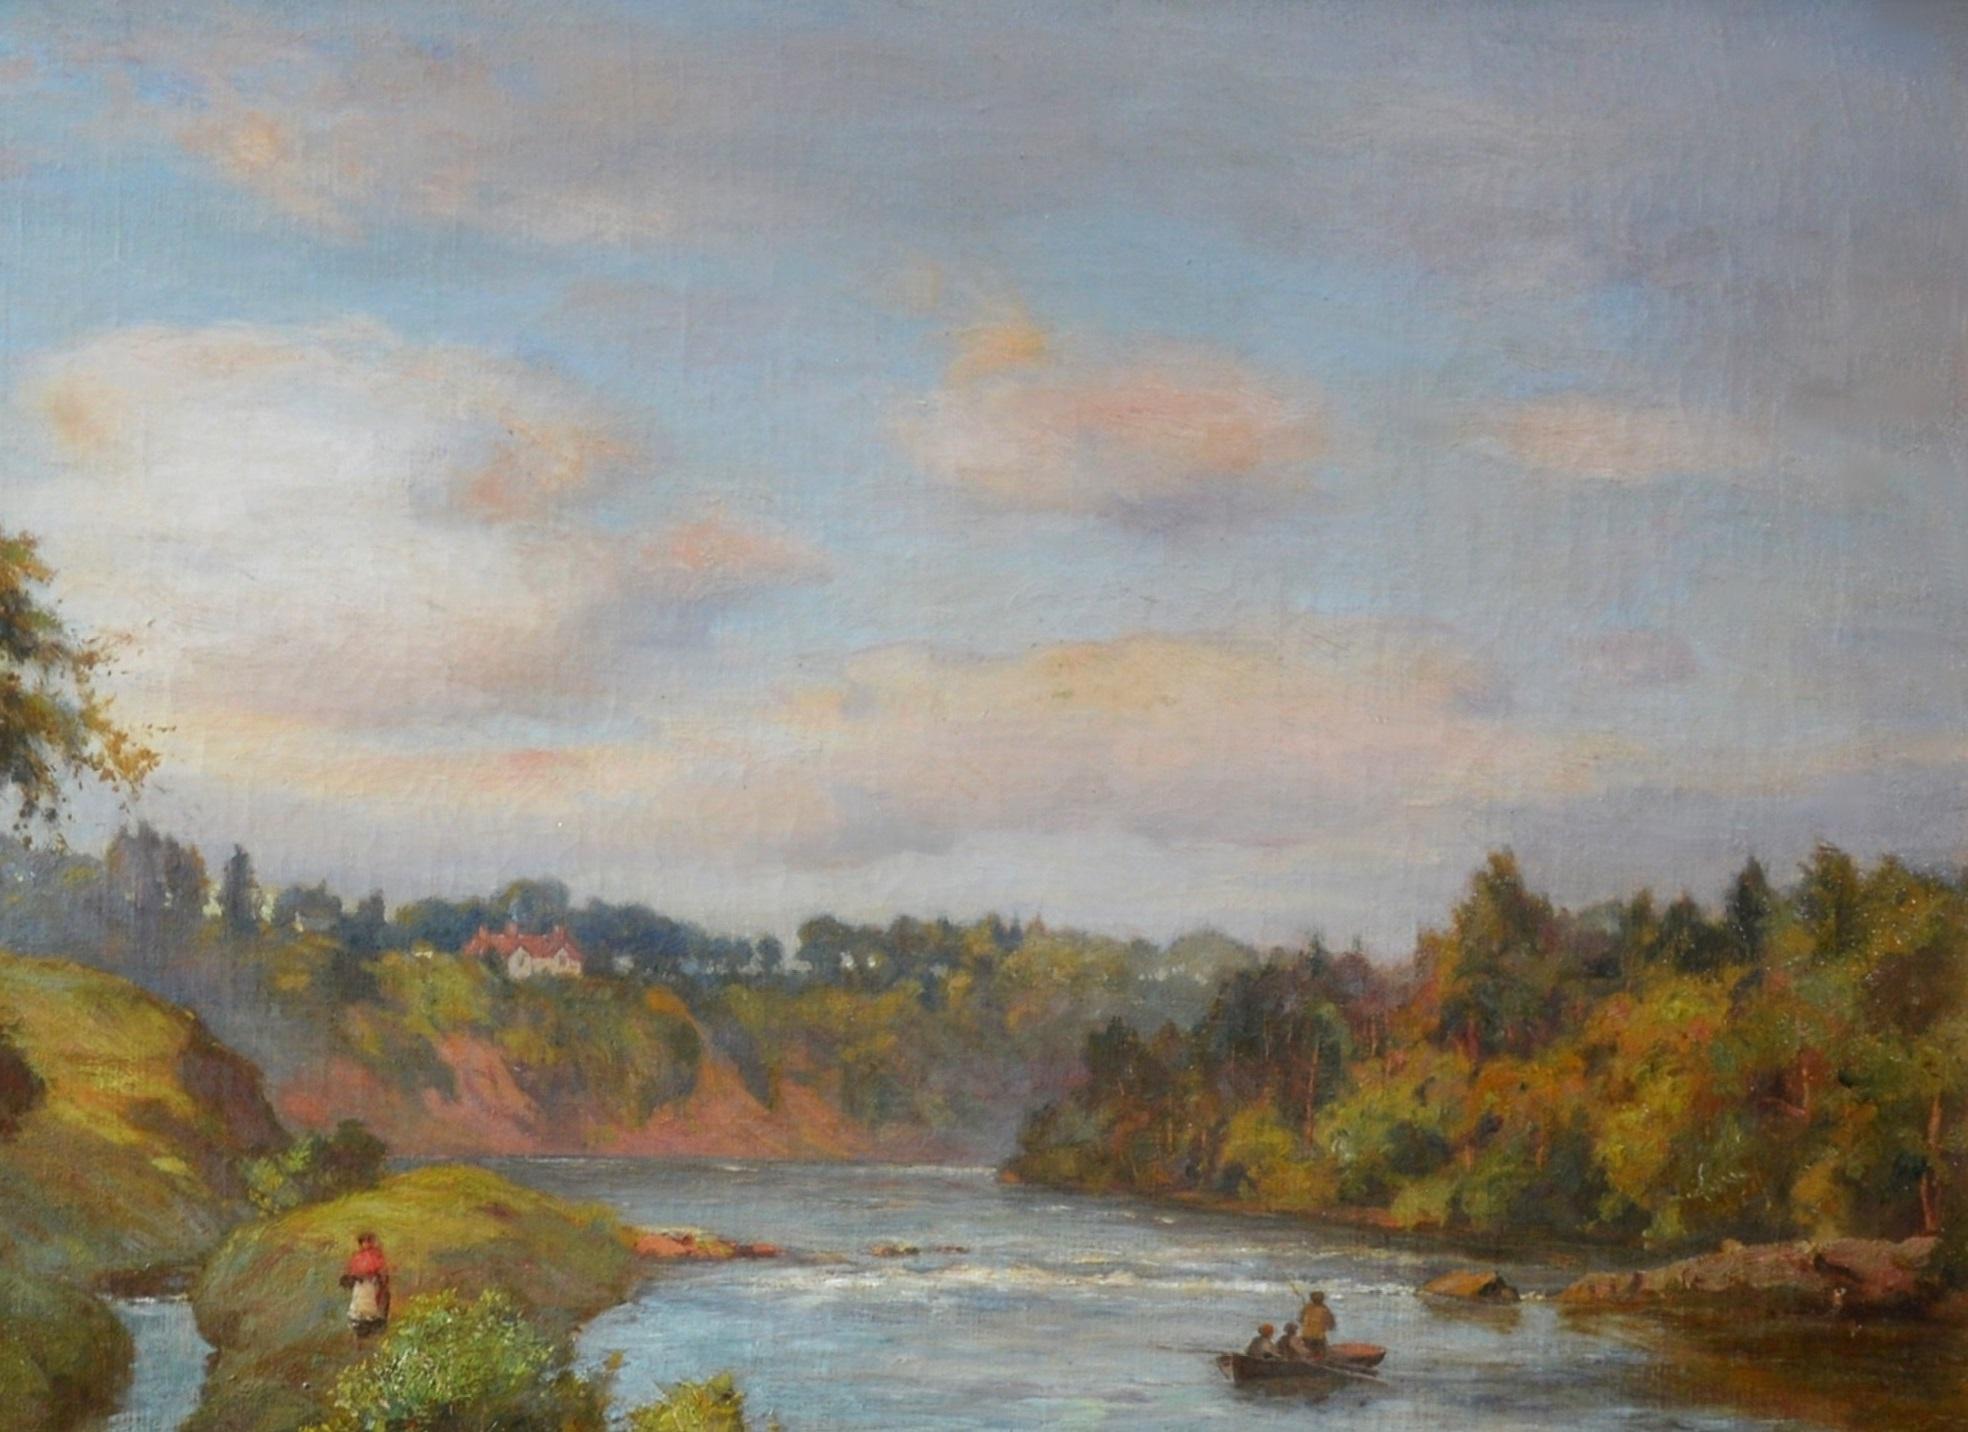 The River Tay near Stanley - 19th Century Scottish Oil Painting - Brown Figurative Painting by James Kinnear